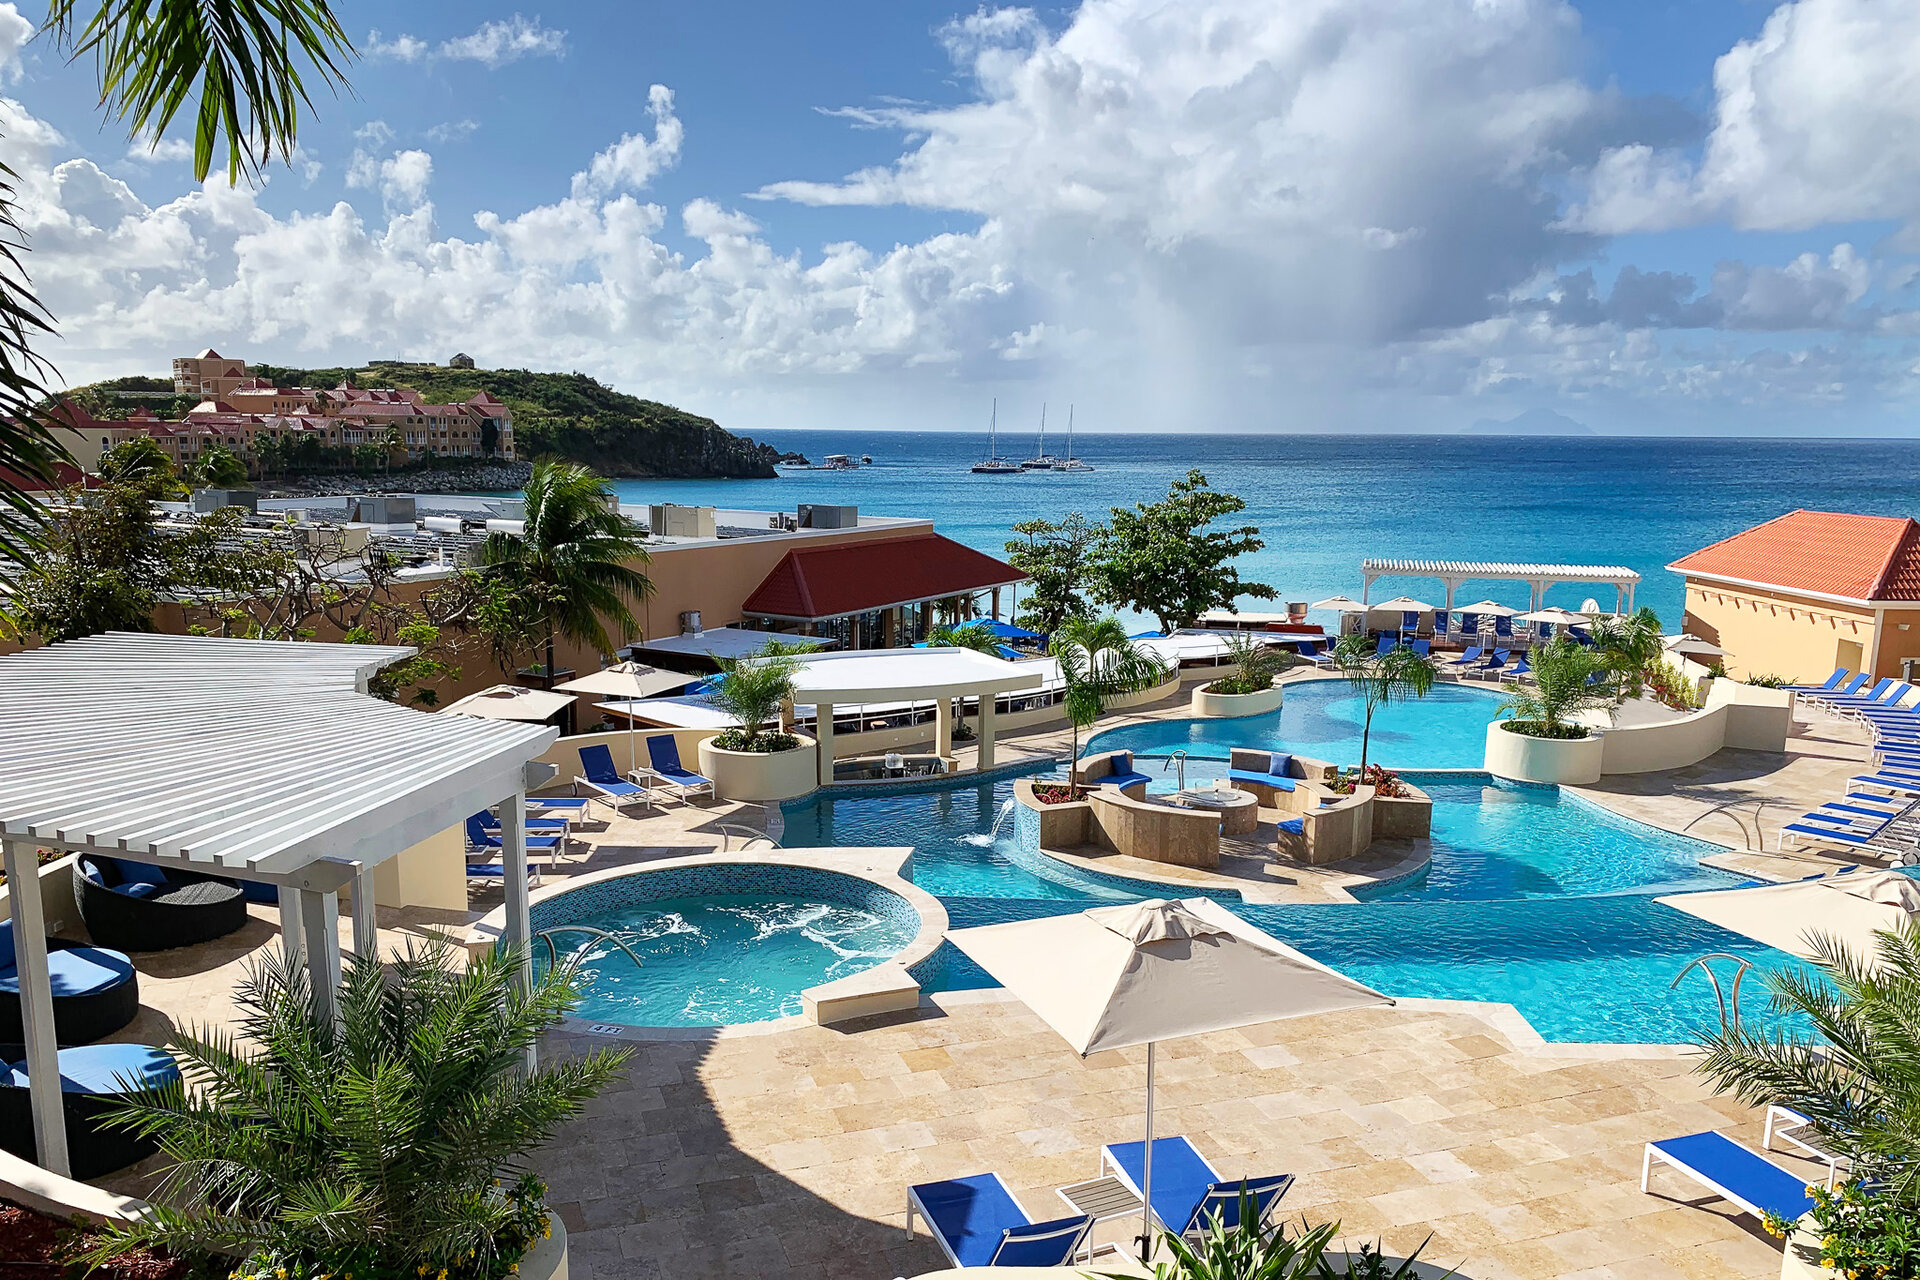 Best All Inclusive Caribbean Honeymoon Packages Under $5,000